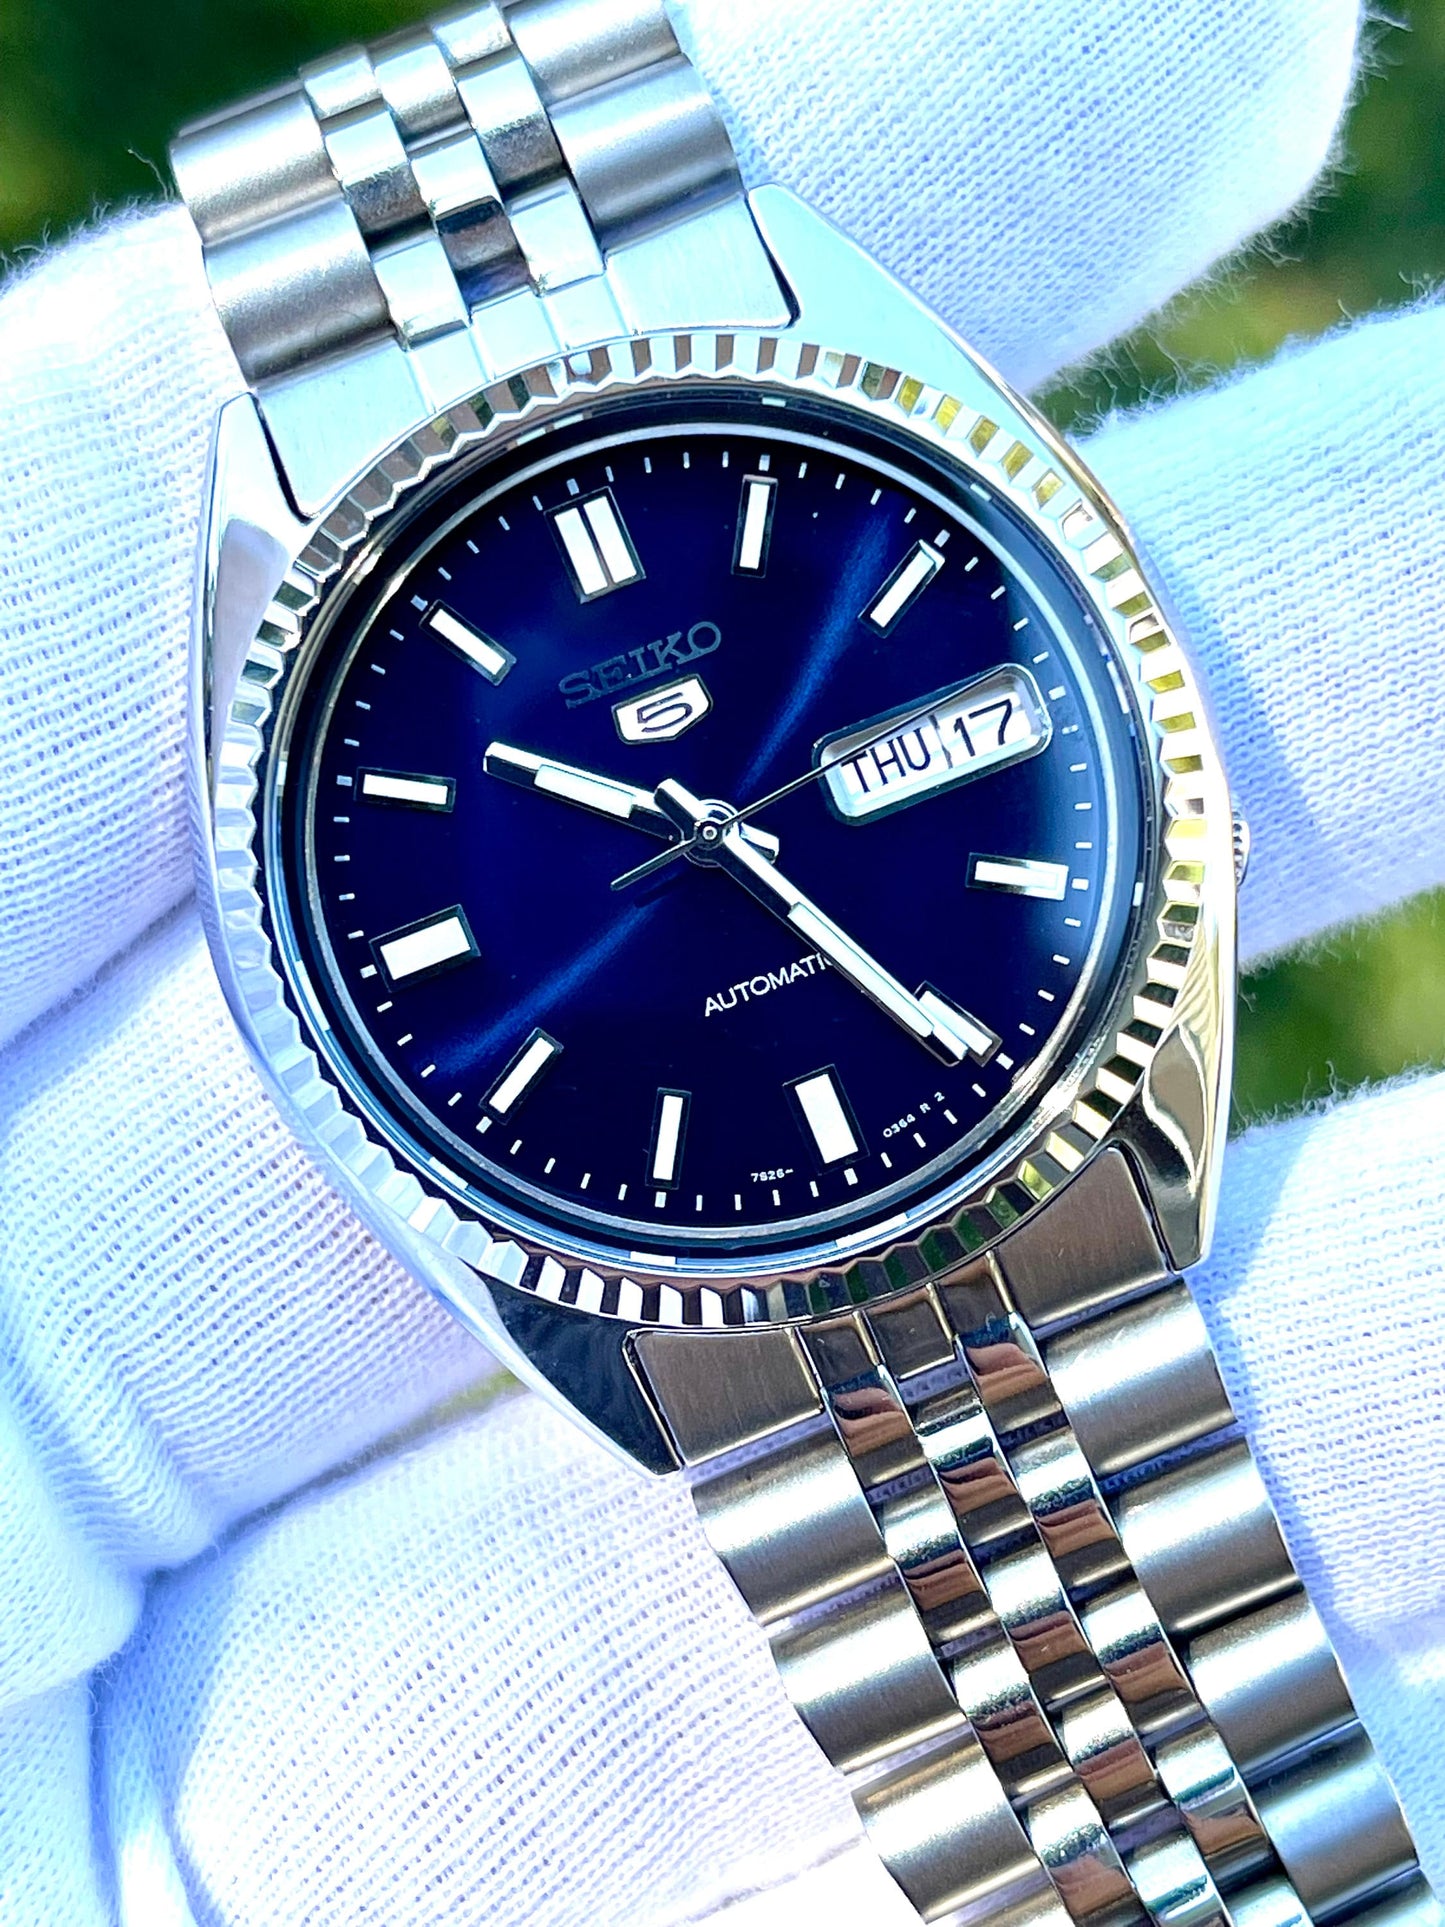 The "SNXSJUST"  Genuine Seiko SNXS Modified (Blue Dial) Datejust Homage w/ Sapphire Crystal, Fluted Bezel and Jublee style bracelet